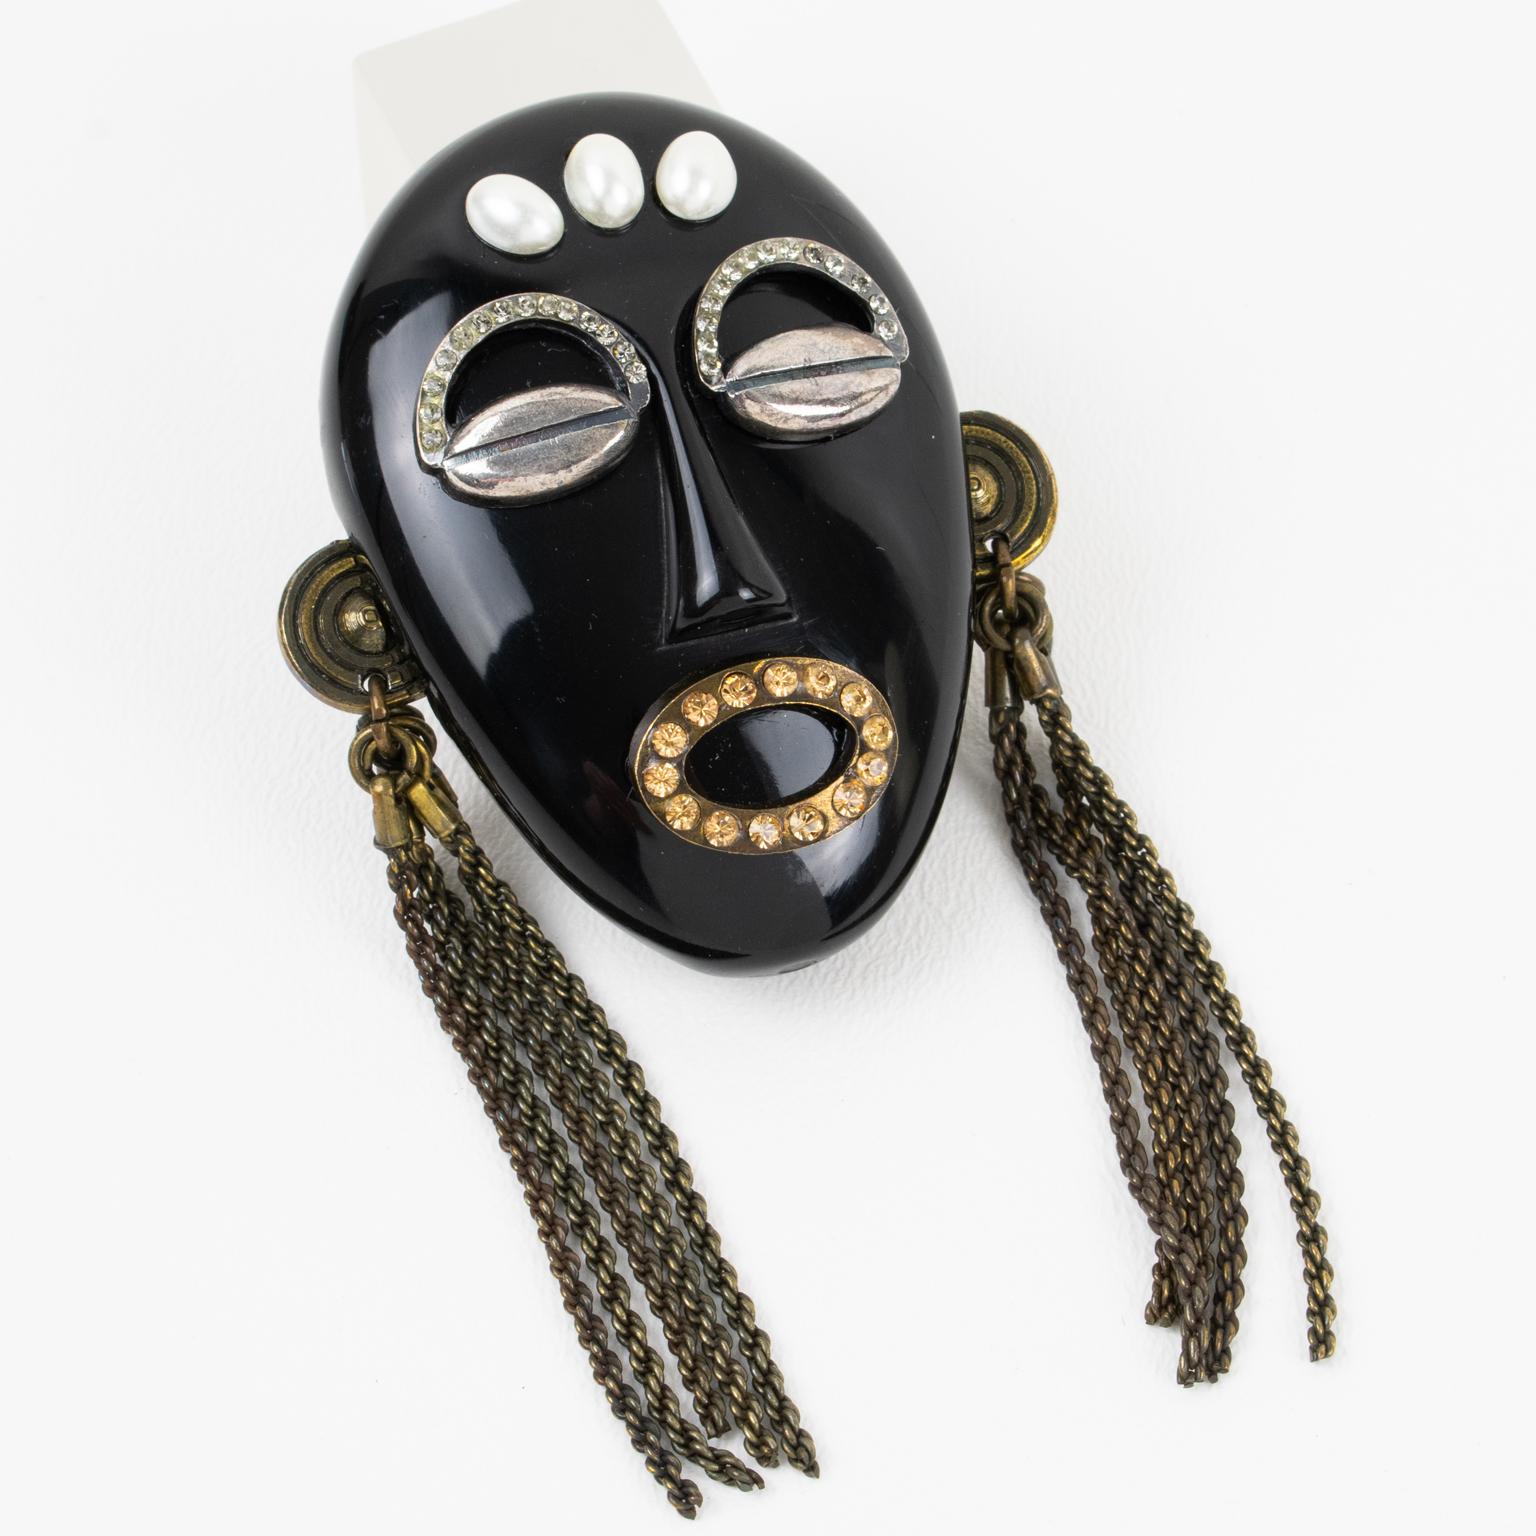 Missoni Italy 1991 Black Resin and Metal Tribal Mask Pin Brooch In Excellent Condition For Sale In Atlanta, GA